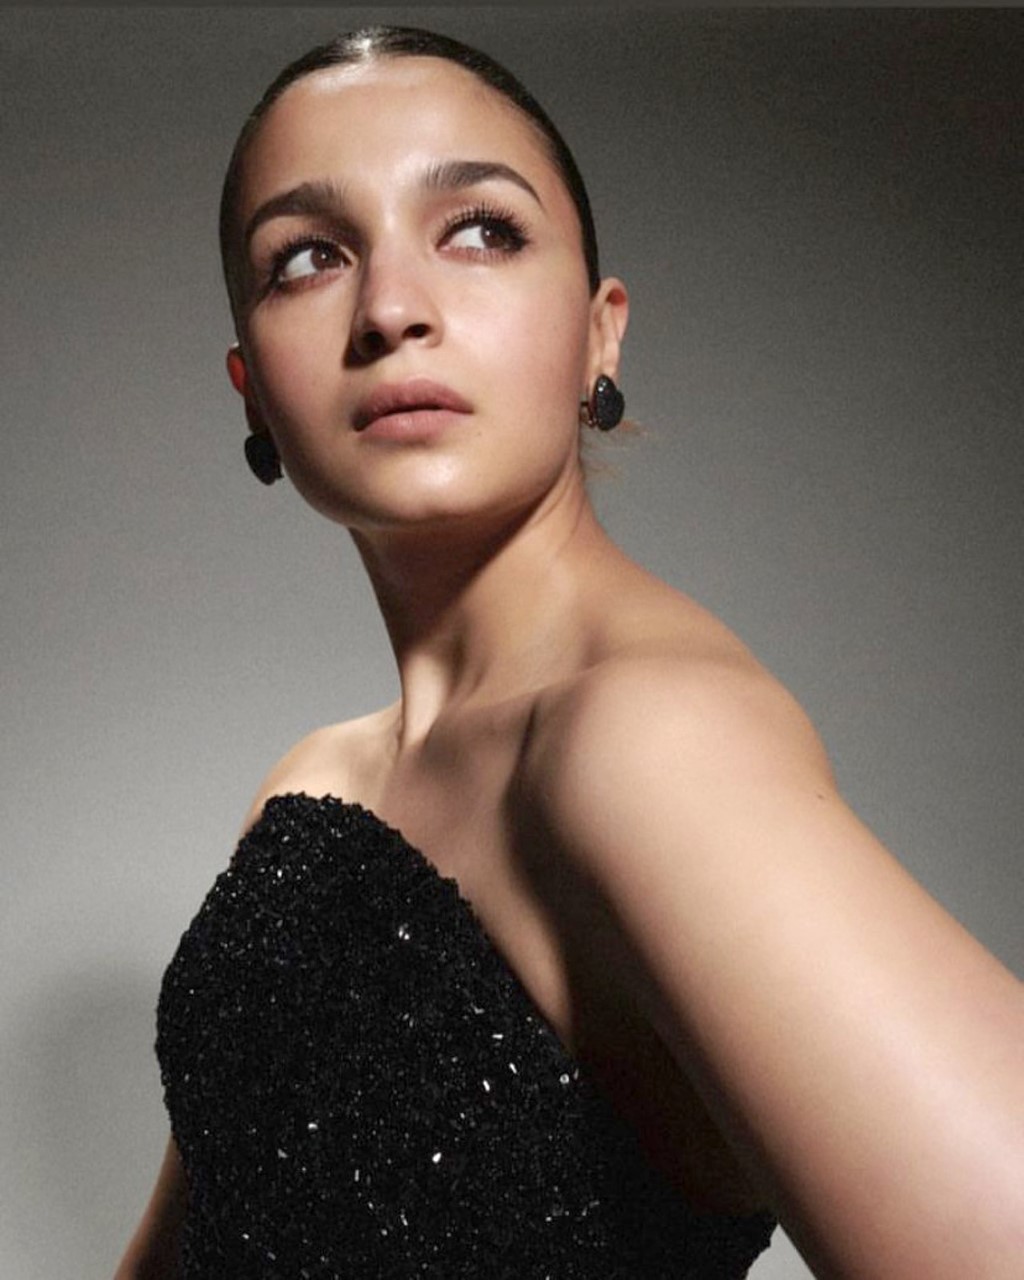 Alia Bhatt sets hearts racing at the Filmfare Awards in a show-stopping black gown that exudes elegance and drama